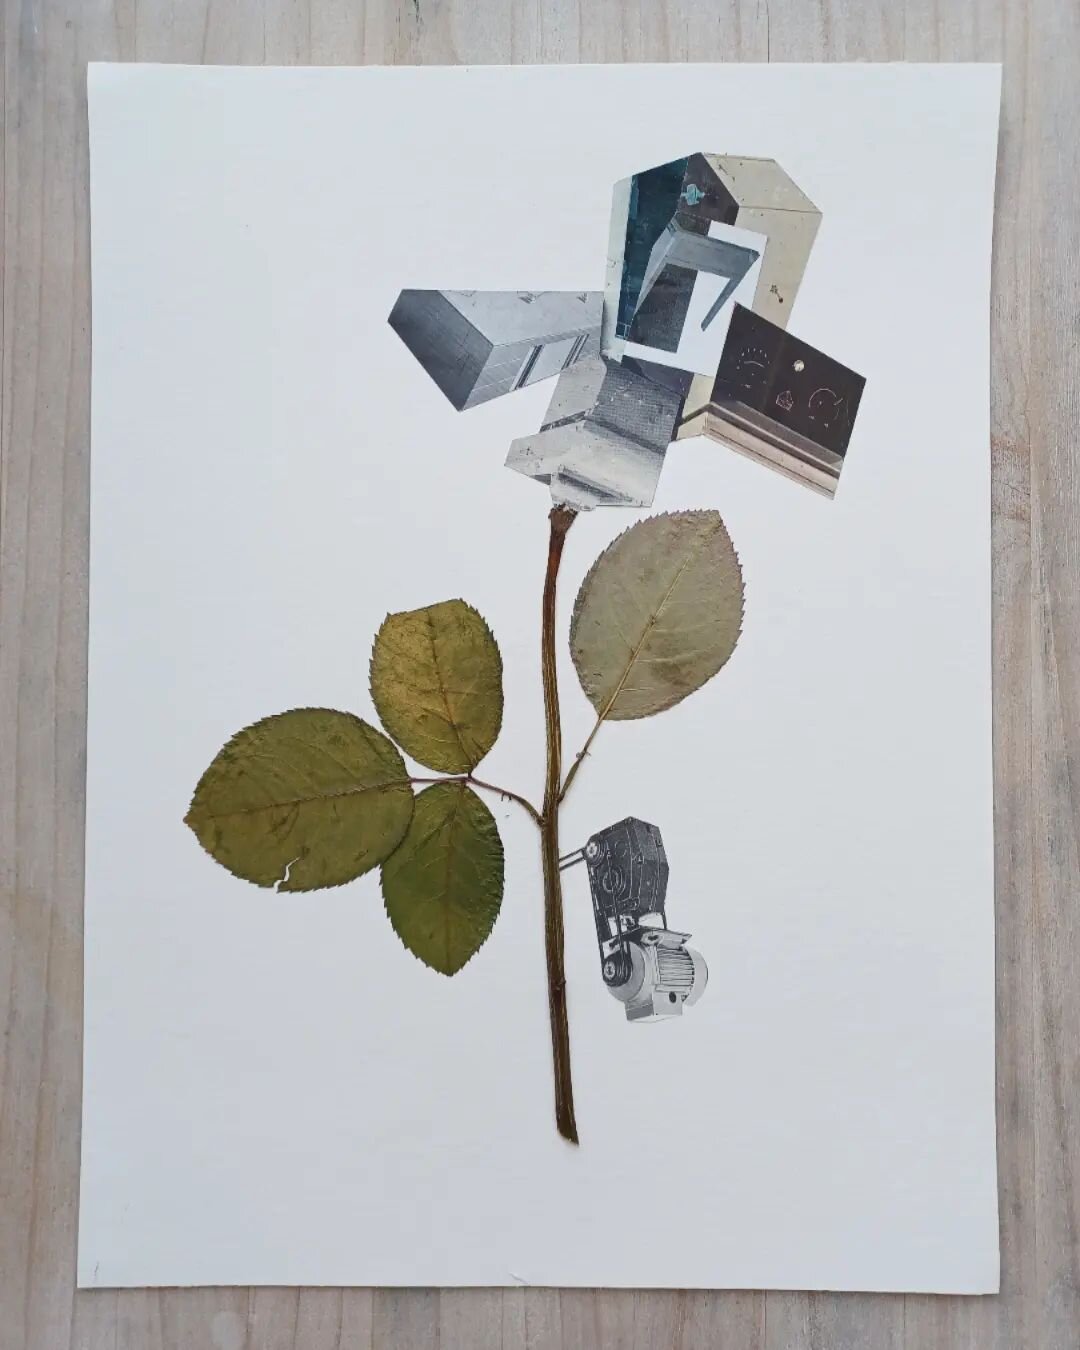 Compaction Plant
30x40cm
Collage on 265gsm bamboo paper
.
.
Natural pressed flower stem with paper collage.
.
.
#benjaminwest #bwcreates #collage_art #collageart #collageartist #collageartwork #analoguecollage #abstractcollage #collageartistsx #colla